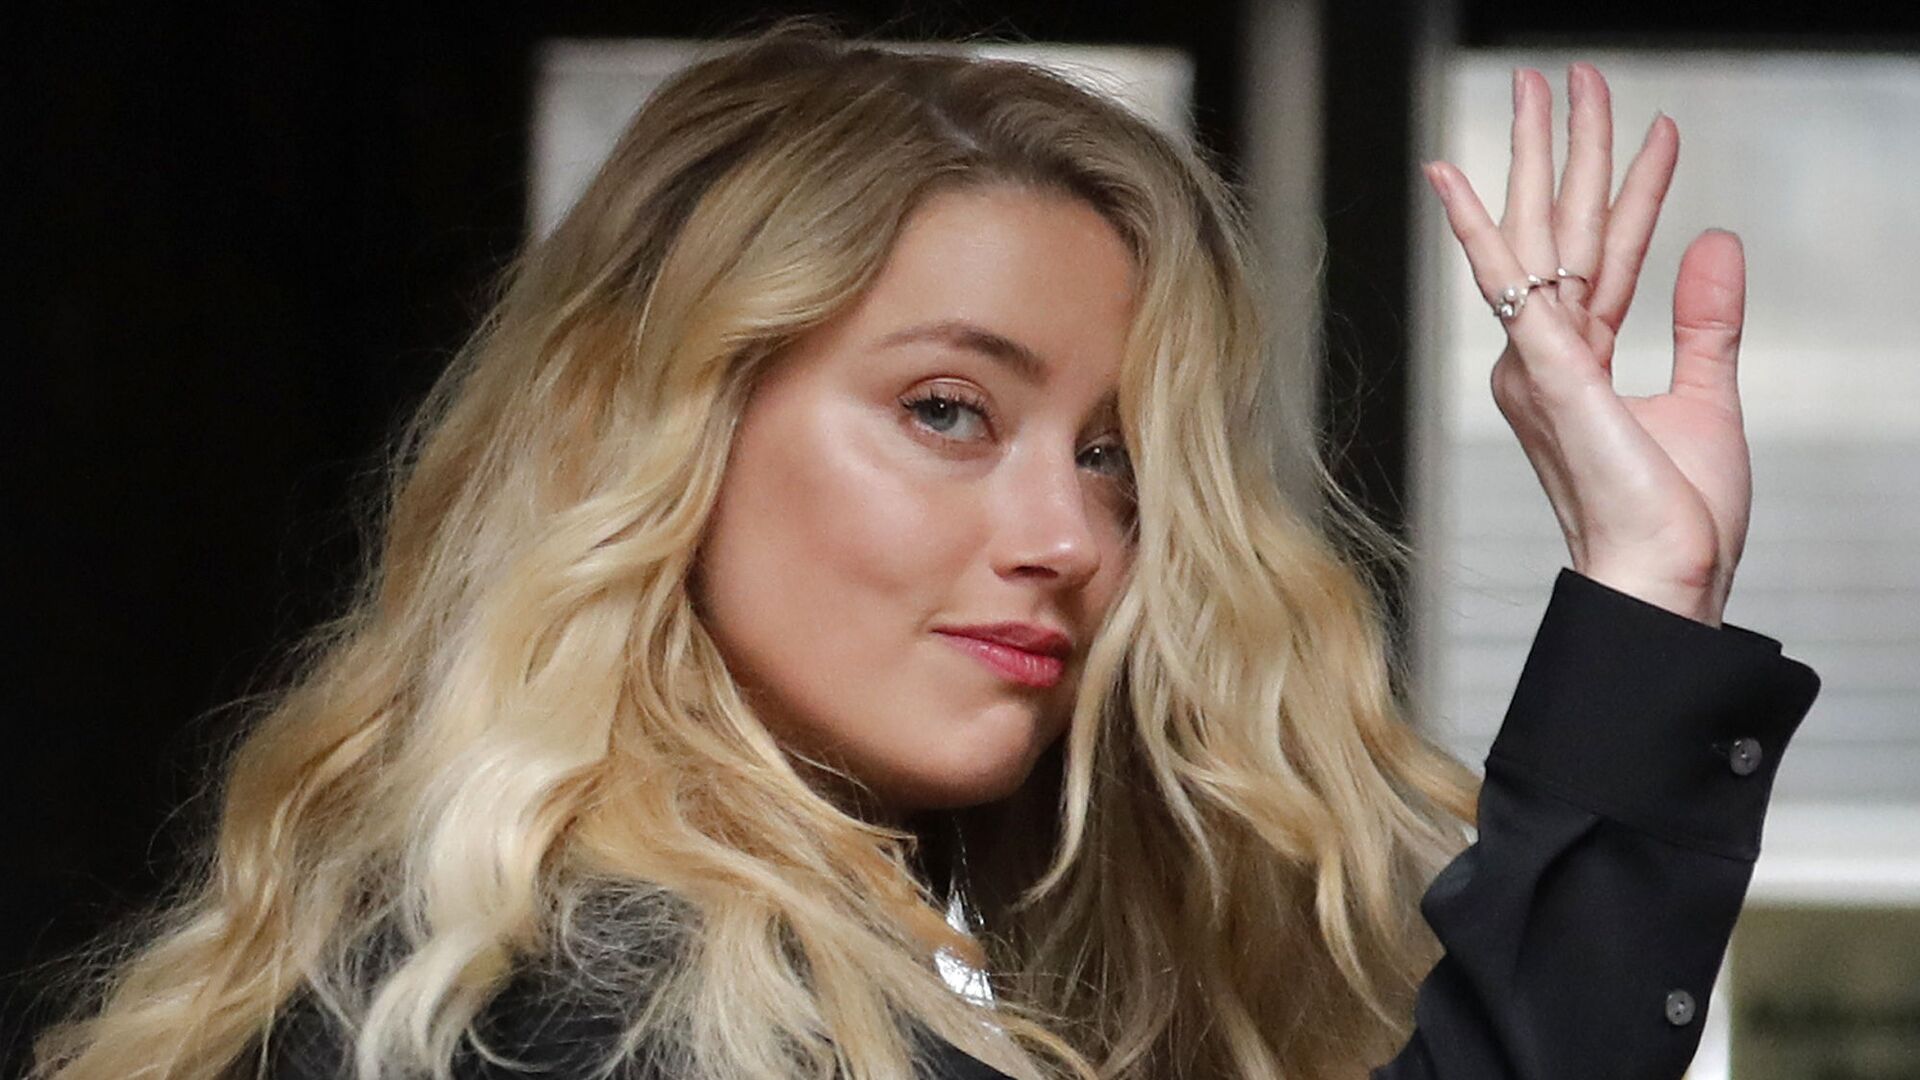 US Actress Amber Heard, former wife of actor Johnny Depp, arrives at the High Court in London, Tuesday, July 28, 2020.  - Sputnik International, 1920, 27.12.2021